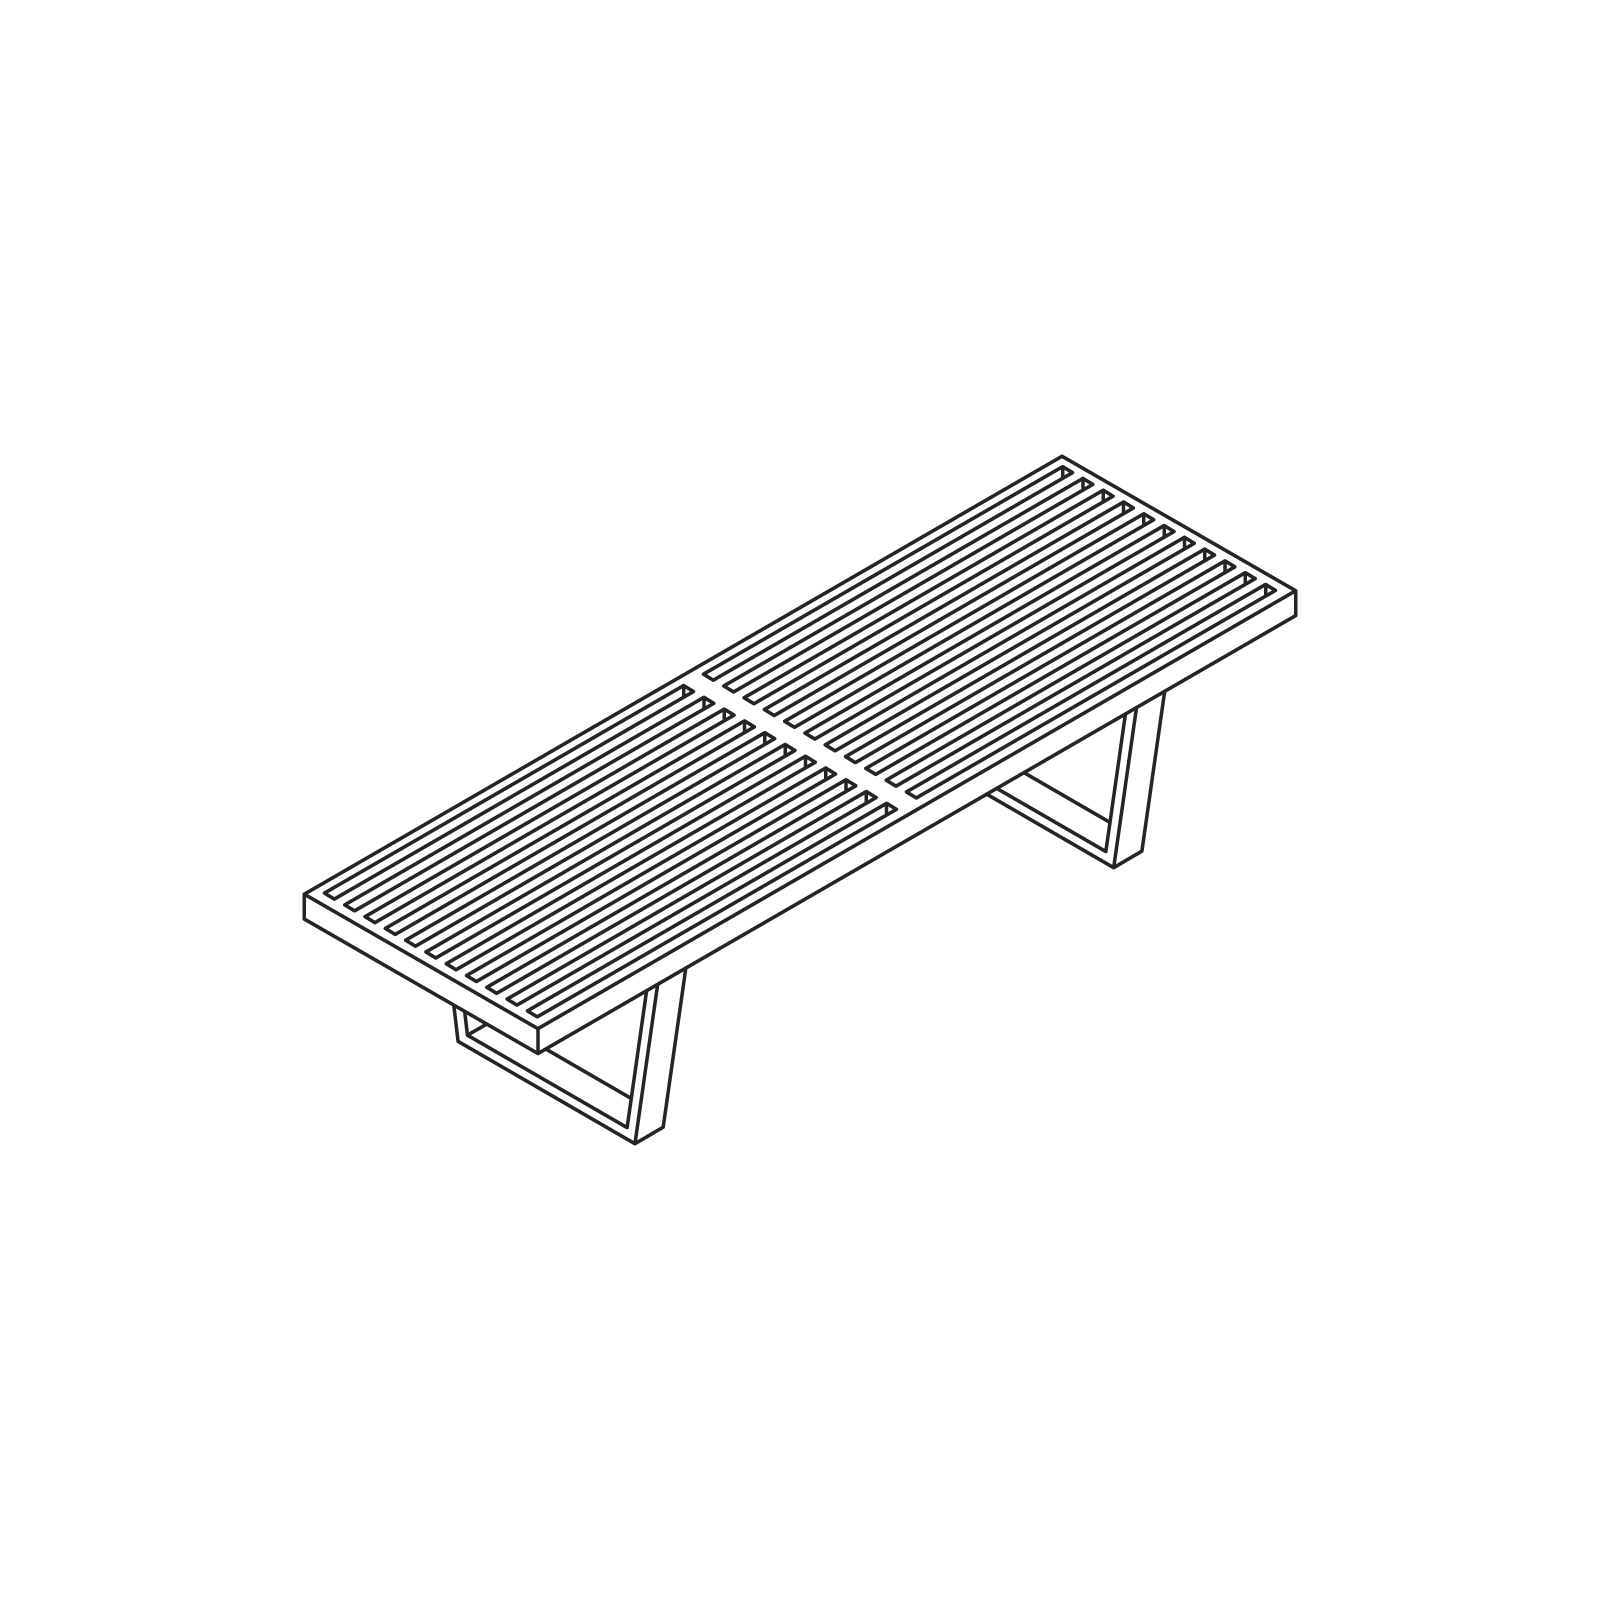 A line drawing - Nelson Platform Bench–Wood Base